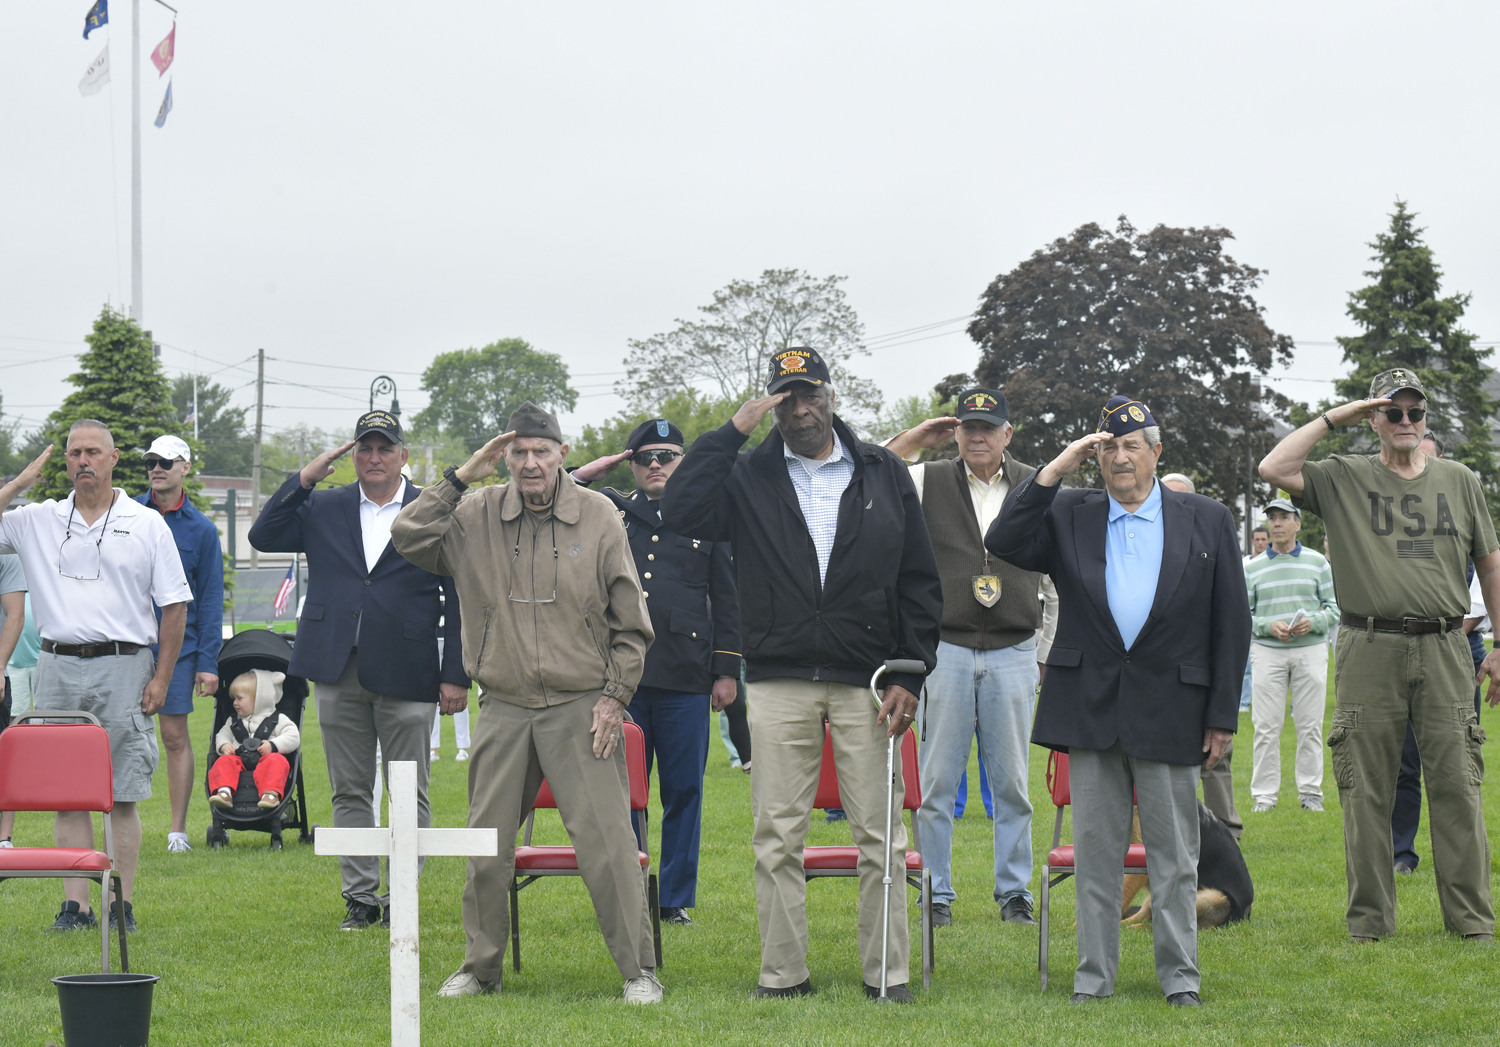 Veterans salute at memorial Day services in Agawam Park on Monday.